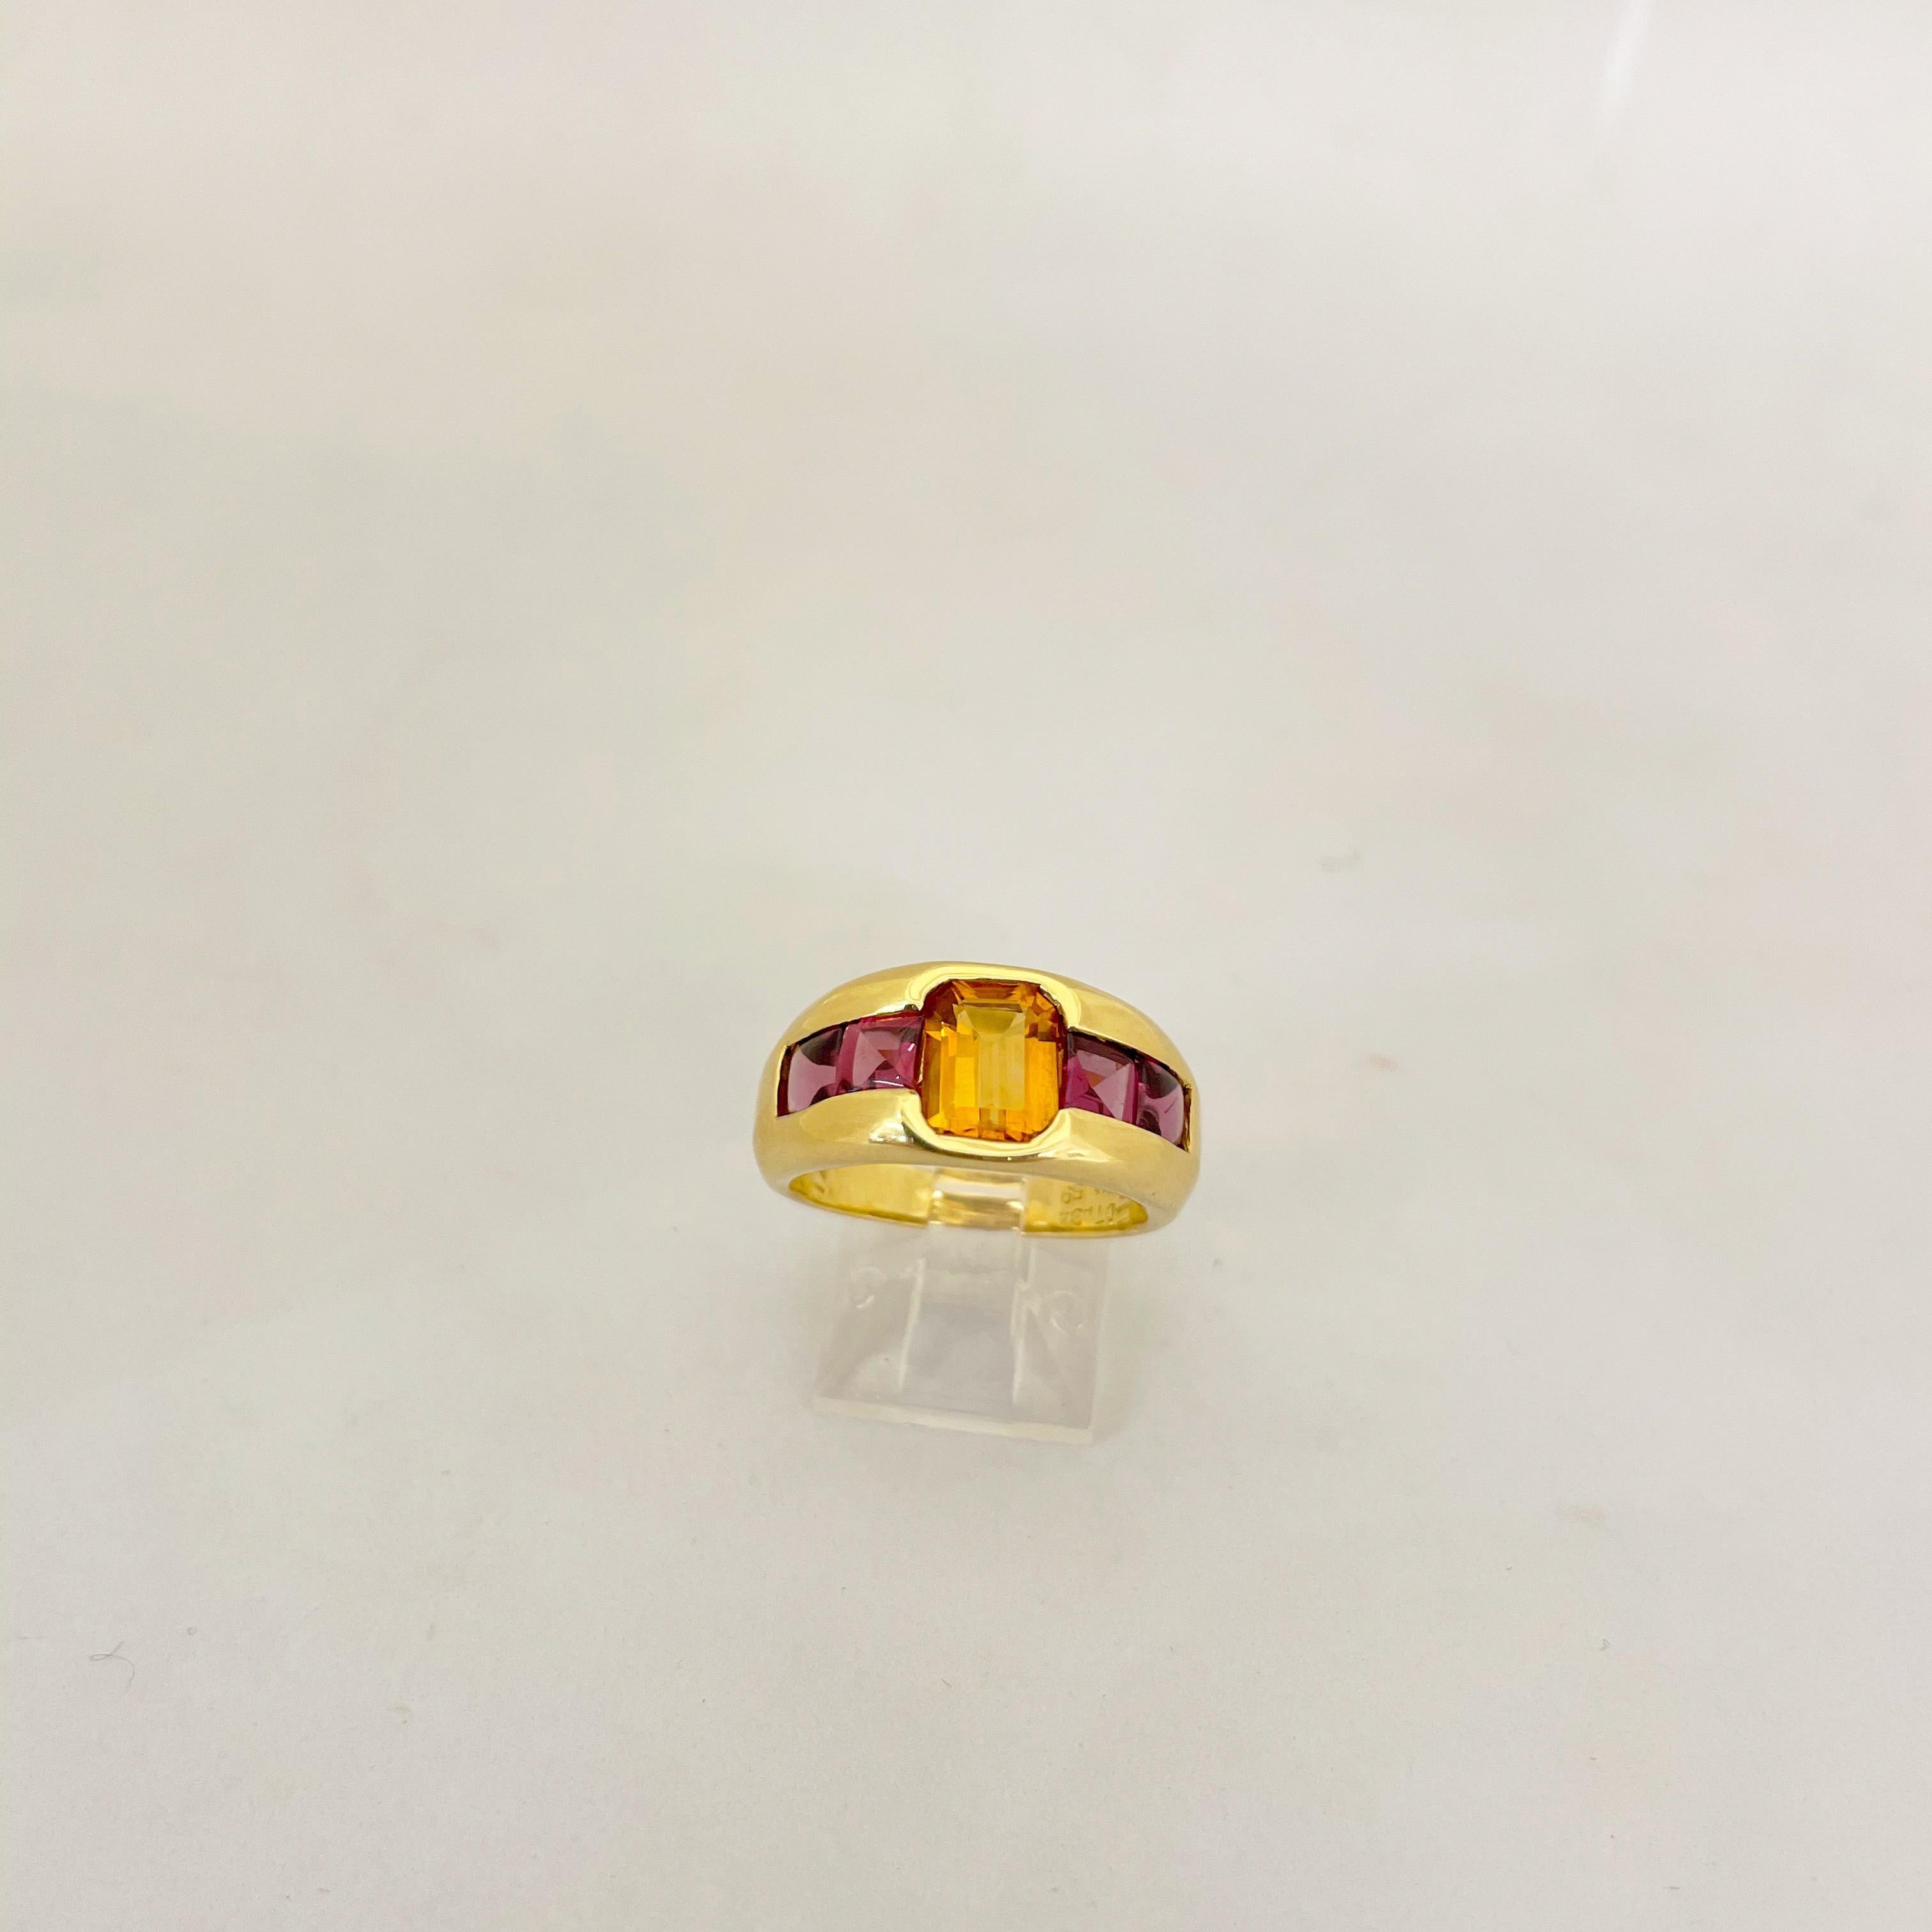 Gregg Ruth 18KT Yellow Gold Ring with 1.34Ct. Citrine Center & 1.59Ct. Rhodolite For Sale 4